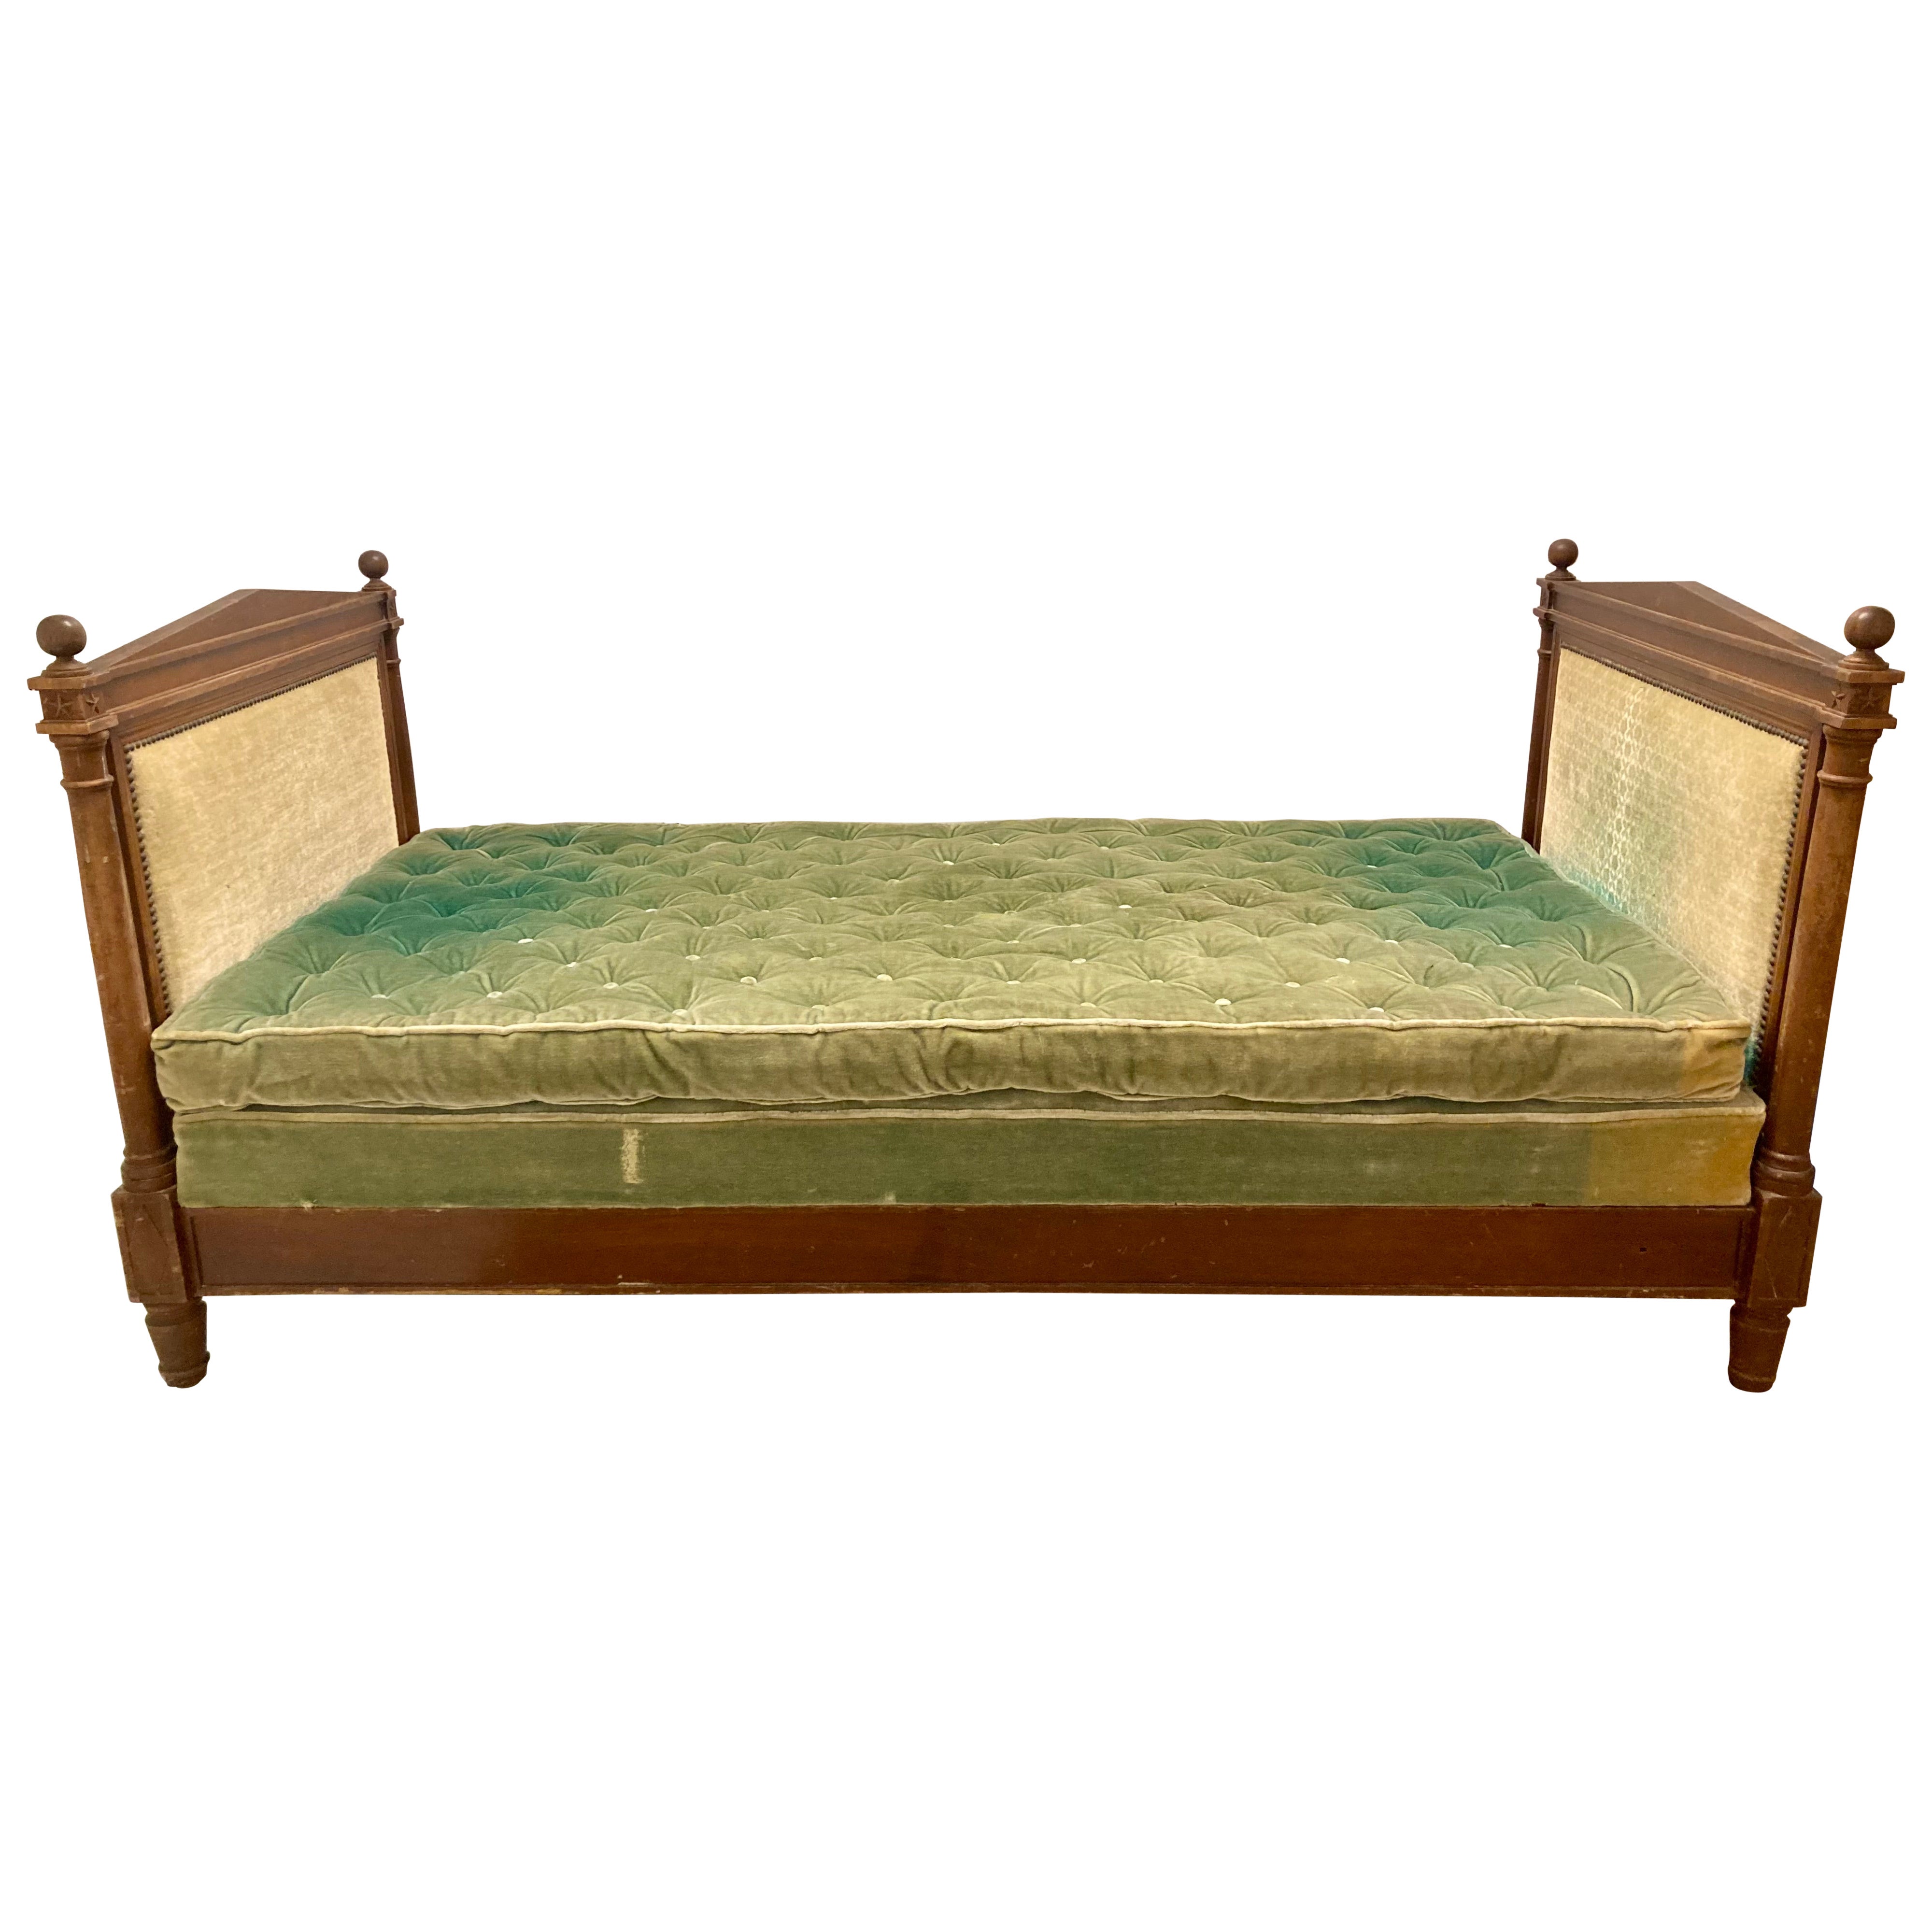 French 19thC Directoire Daybed With Original Tufted Upholstered Seat Cushion Set